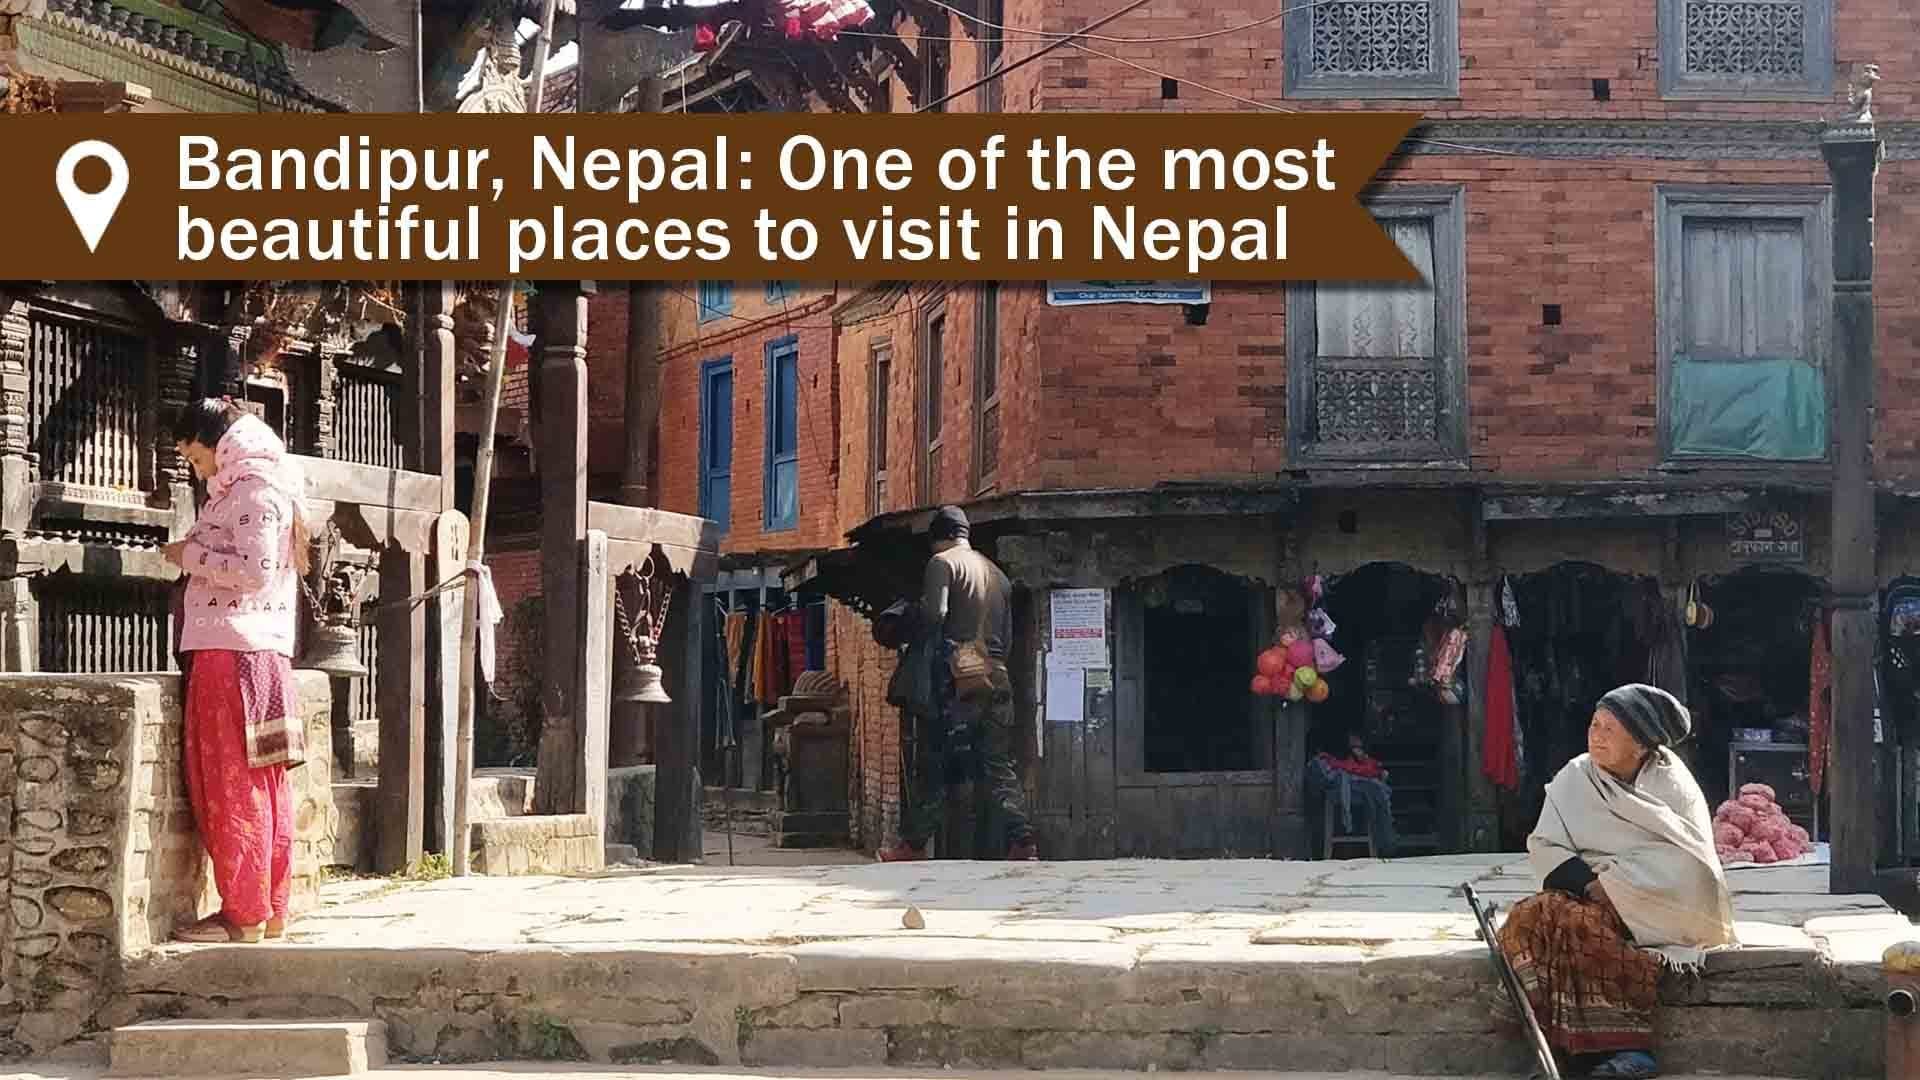 Bandipur Nepal - One of the most beautiful places to visit in Nepal